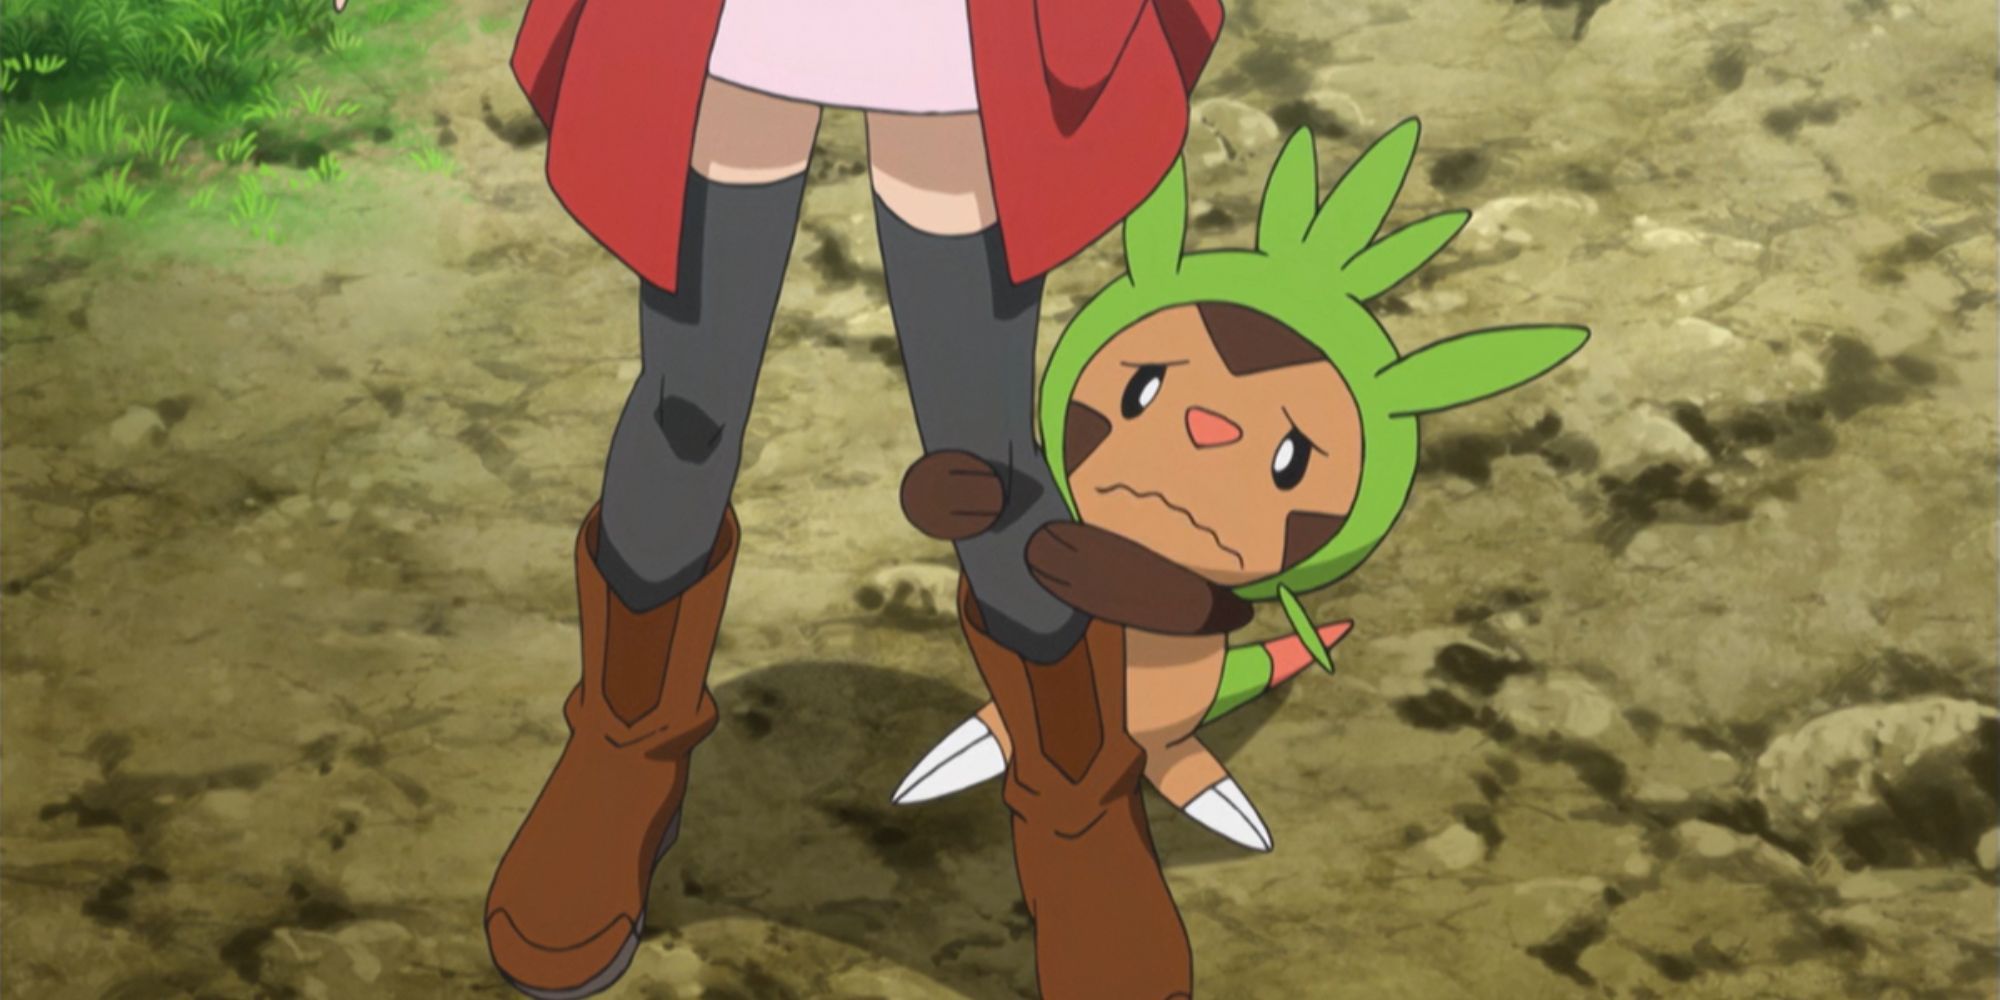 Clemont's Chespin hides behind Serena.